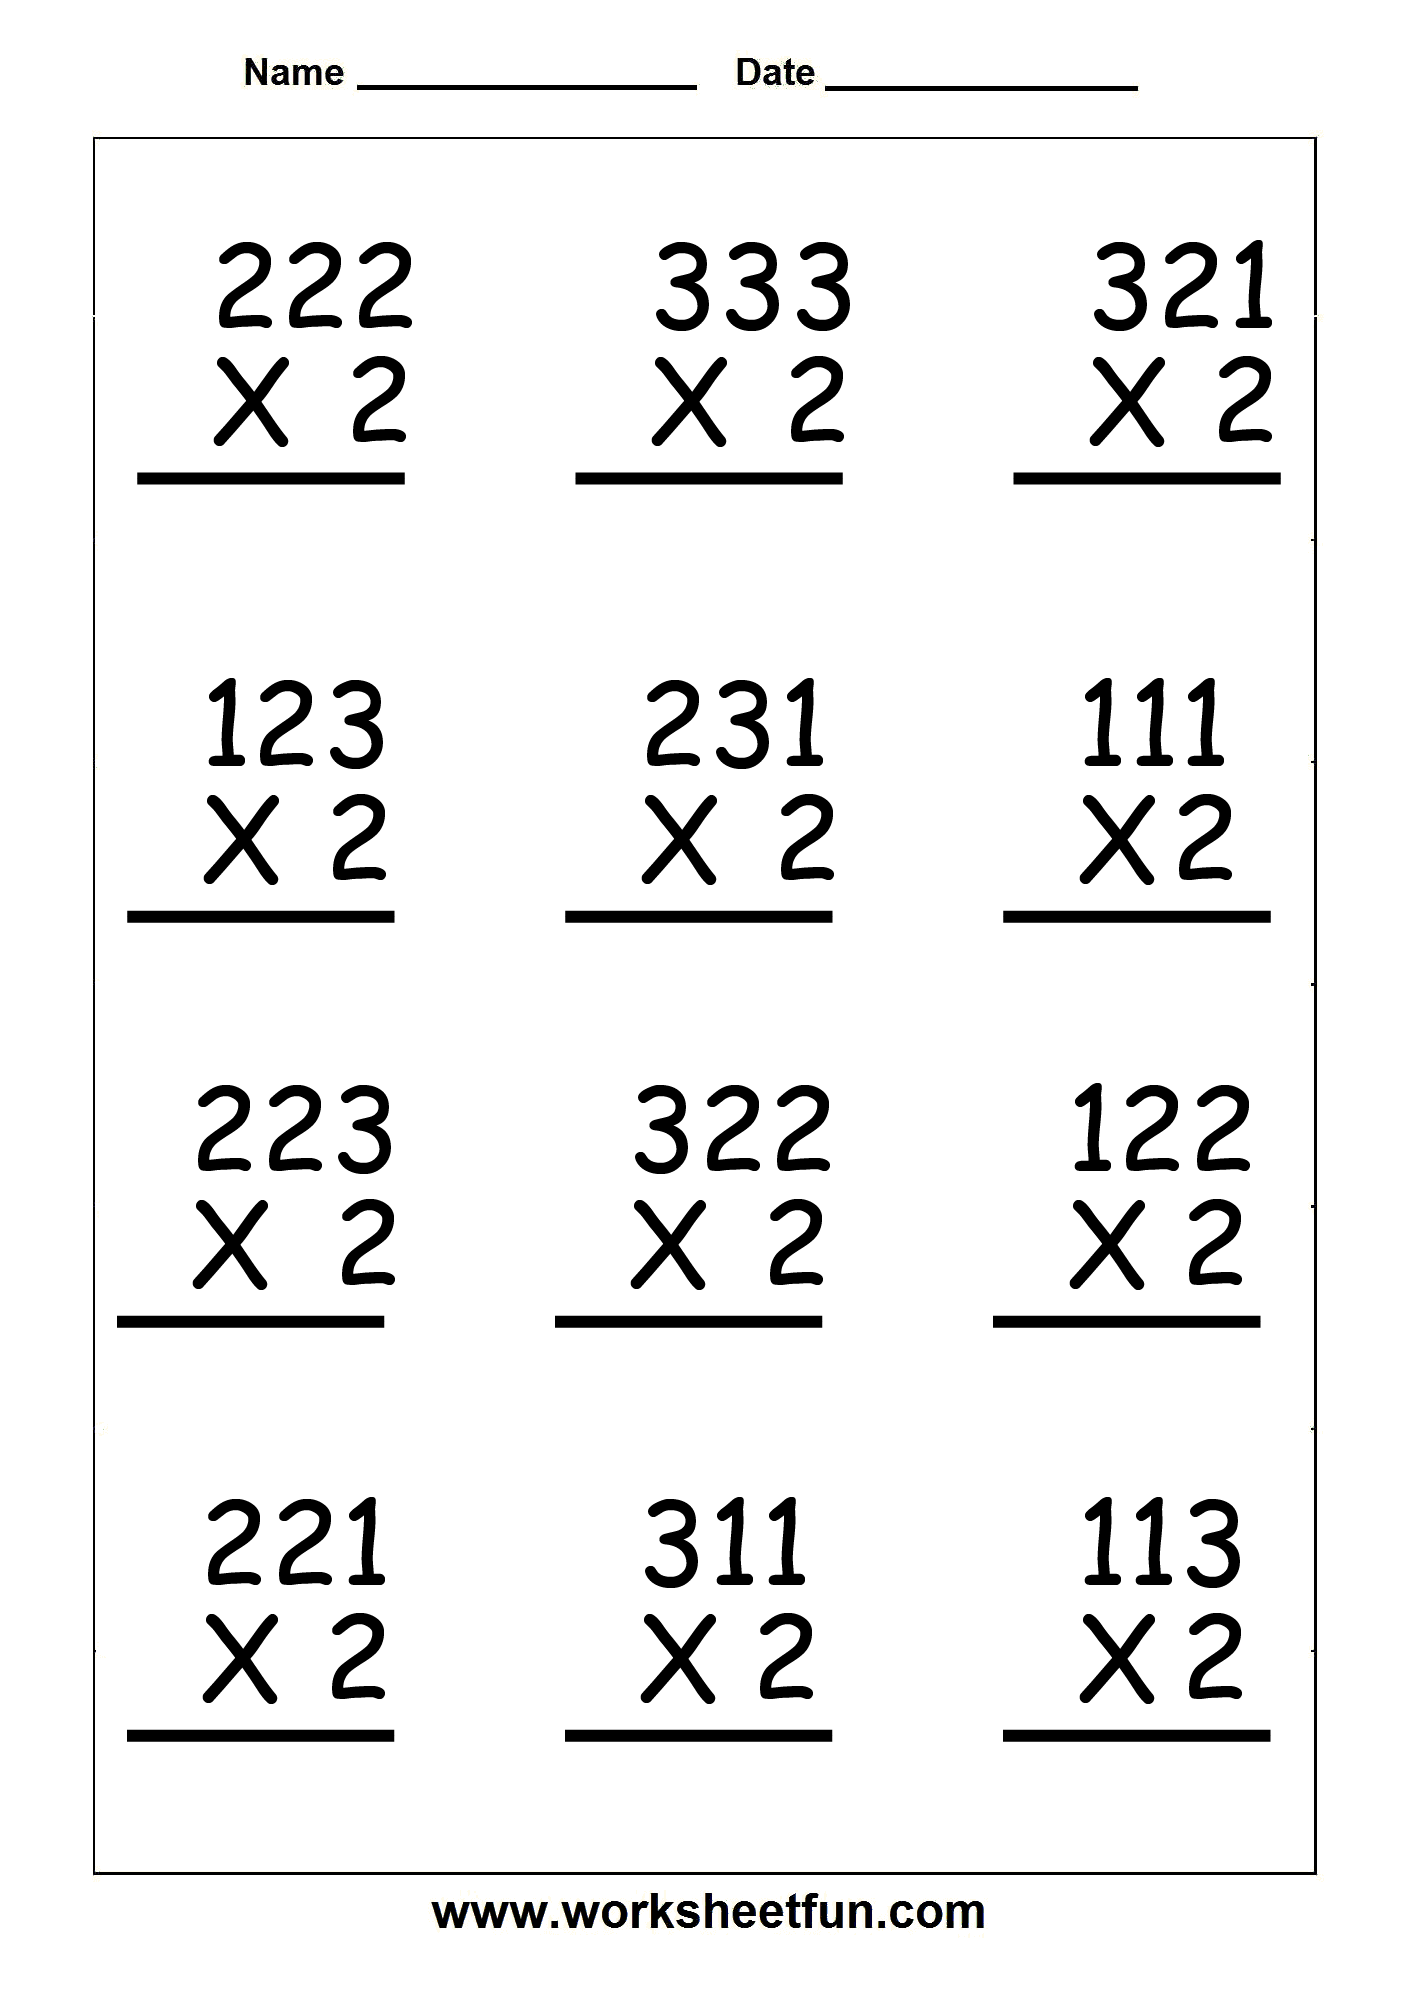 17 Best Images of Three- Digit Addition Worksheets - Three ...